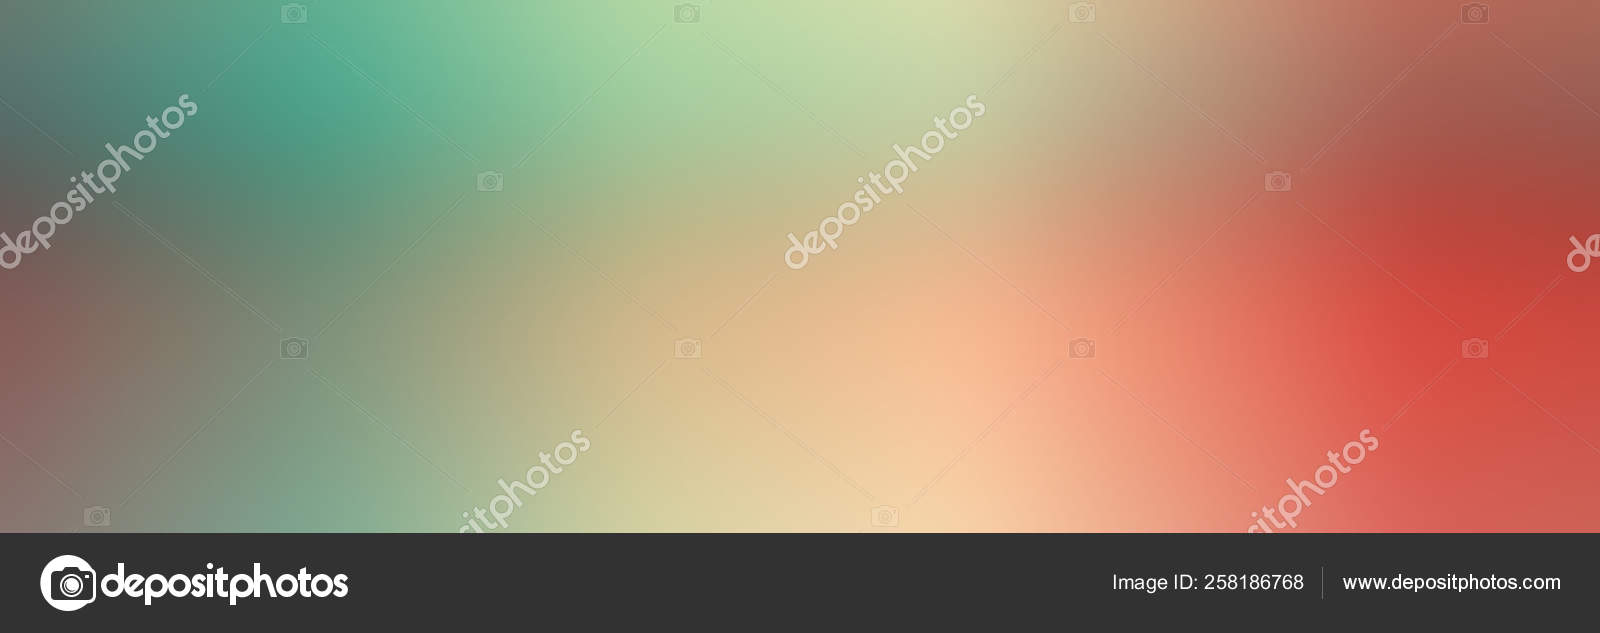 Blur Abstract Background Colorful Gradient Defocused Backdrop Simple Trendy  Design Stock Photo by ©Toluk 258186768